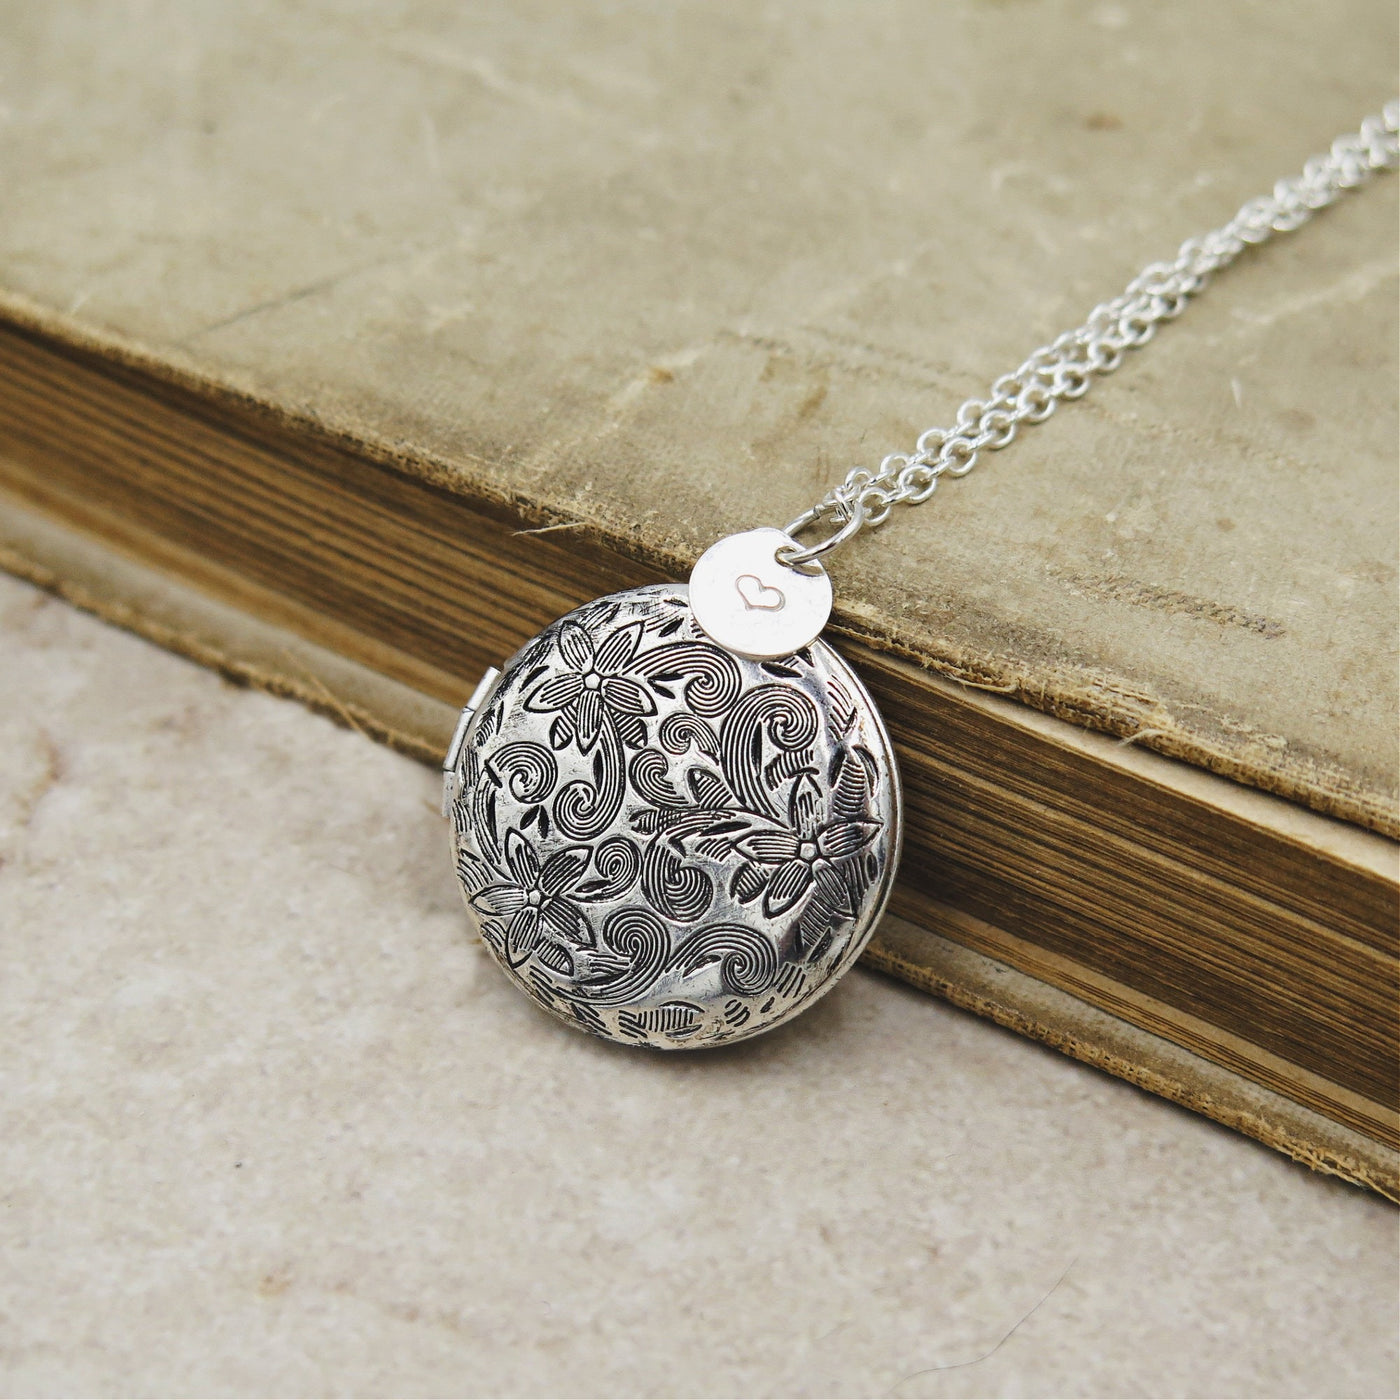 Antiqued Silver Floral Locket with Personalized Charm and Photos